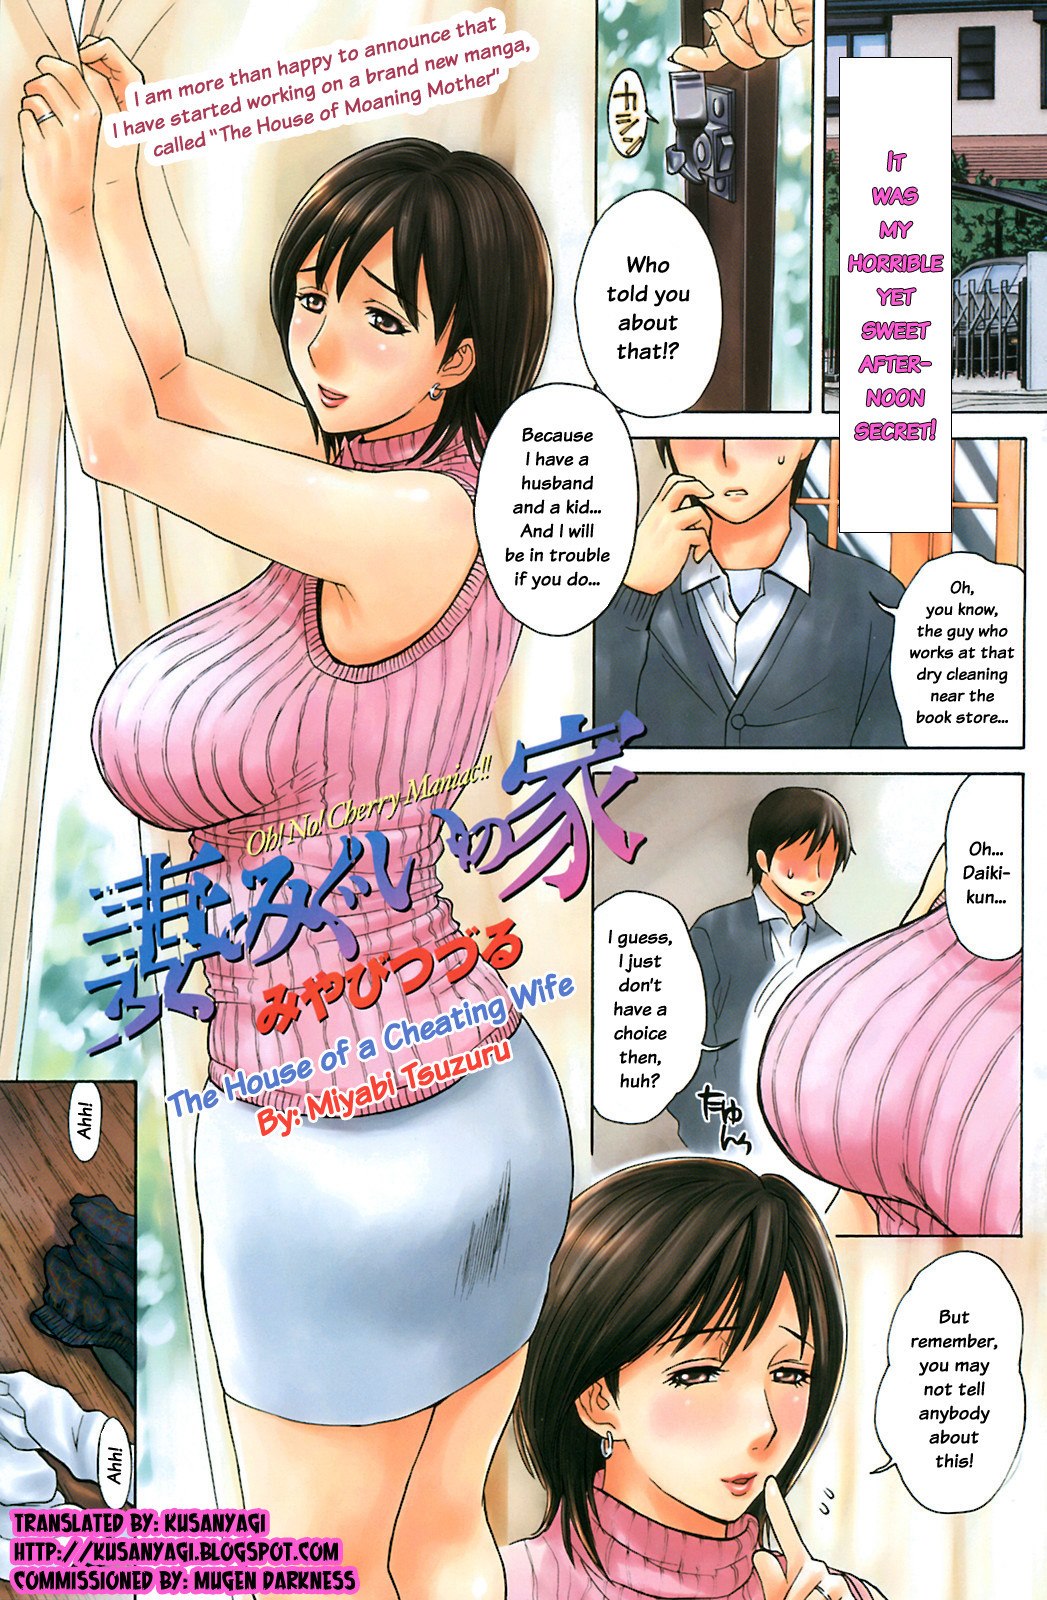 The House of Cheating Wife- Tsumamigui no Ie 18+ Porn Comics